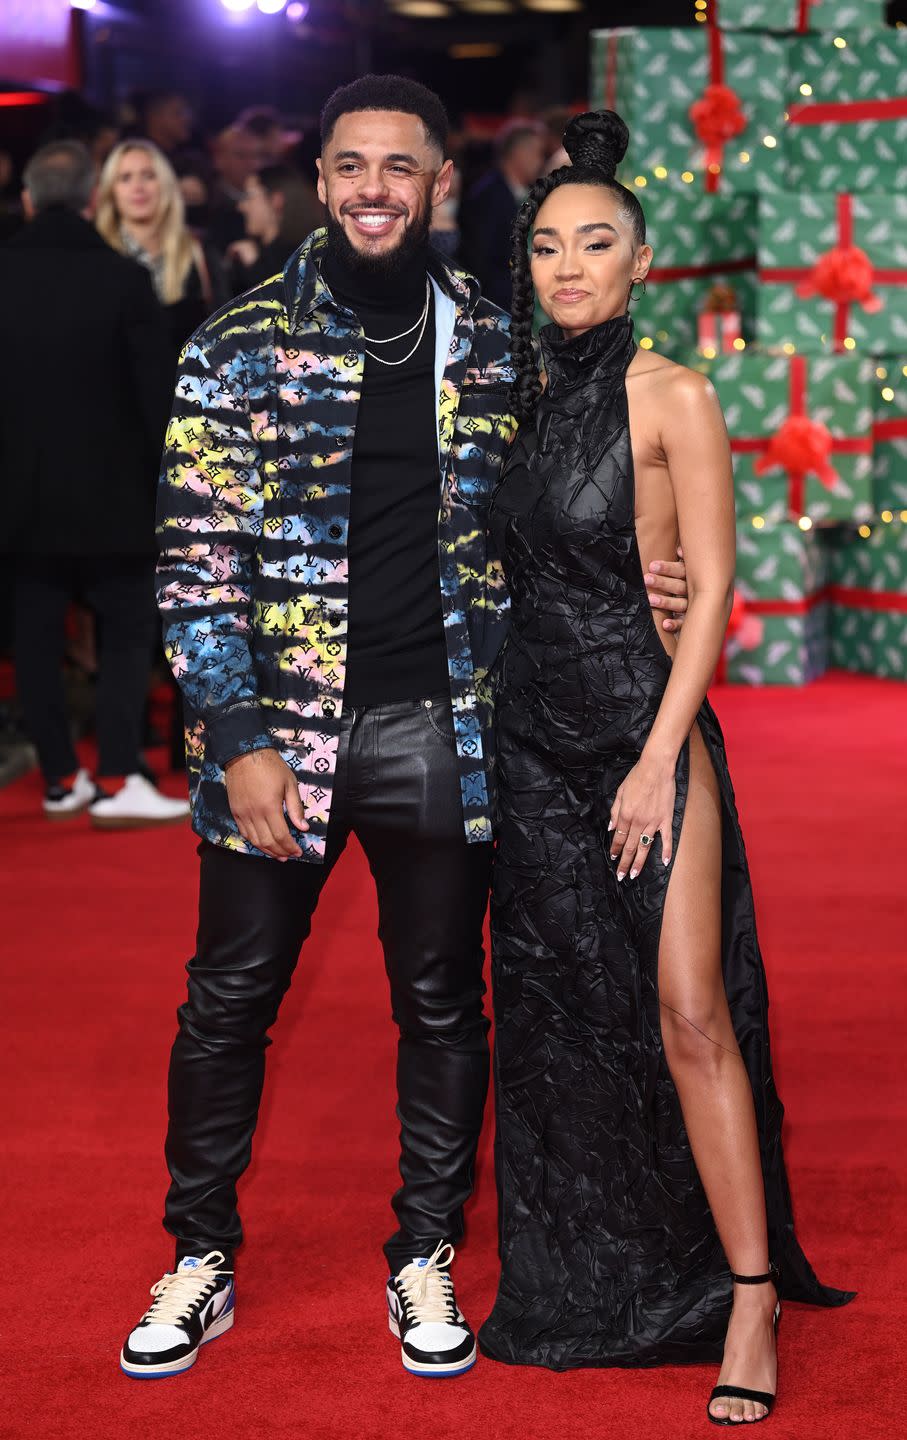 andre gray and leigh anne pinnock attend the world premiere of boxing day on november 30, 2021 in london